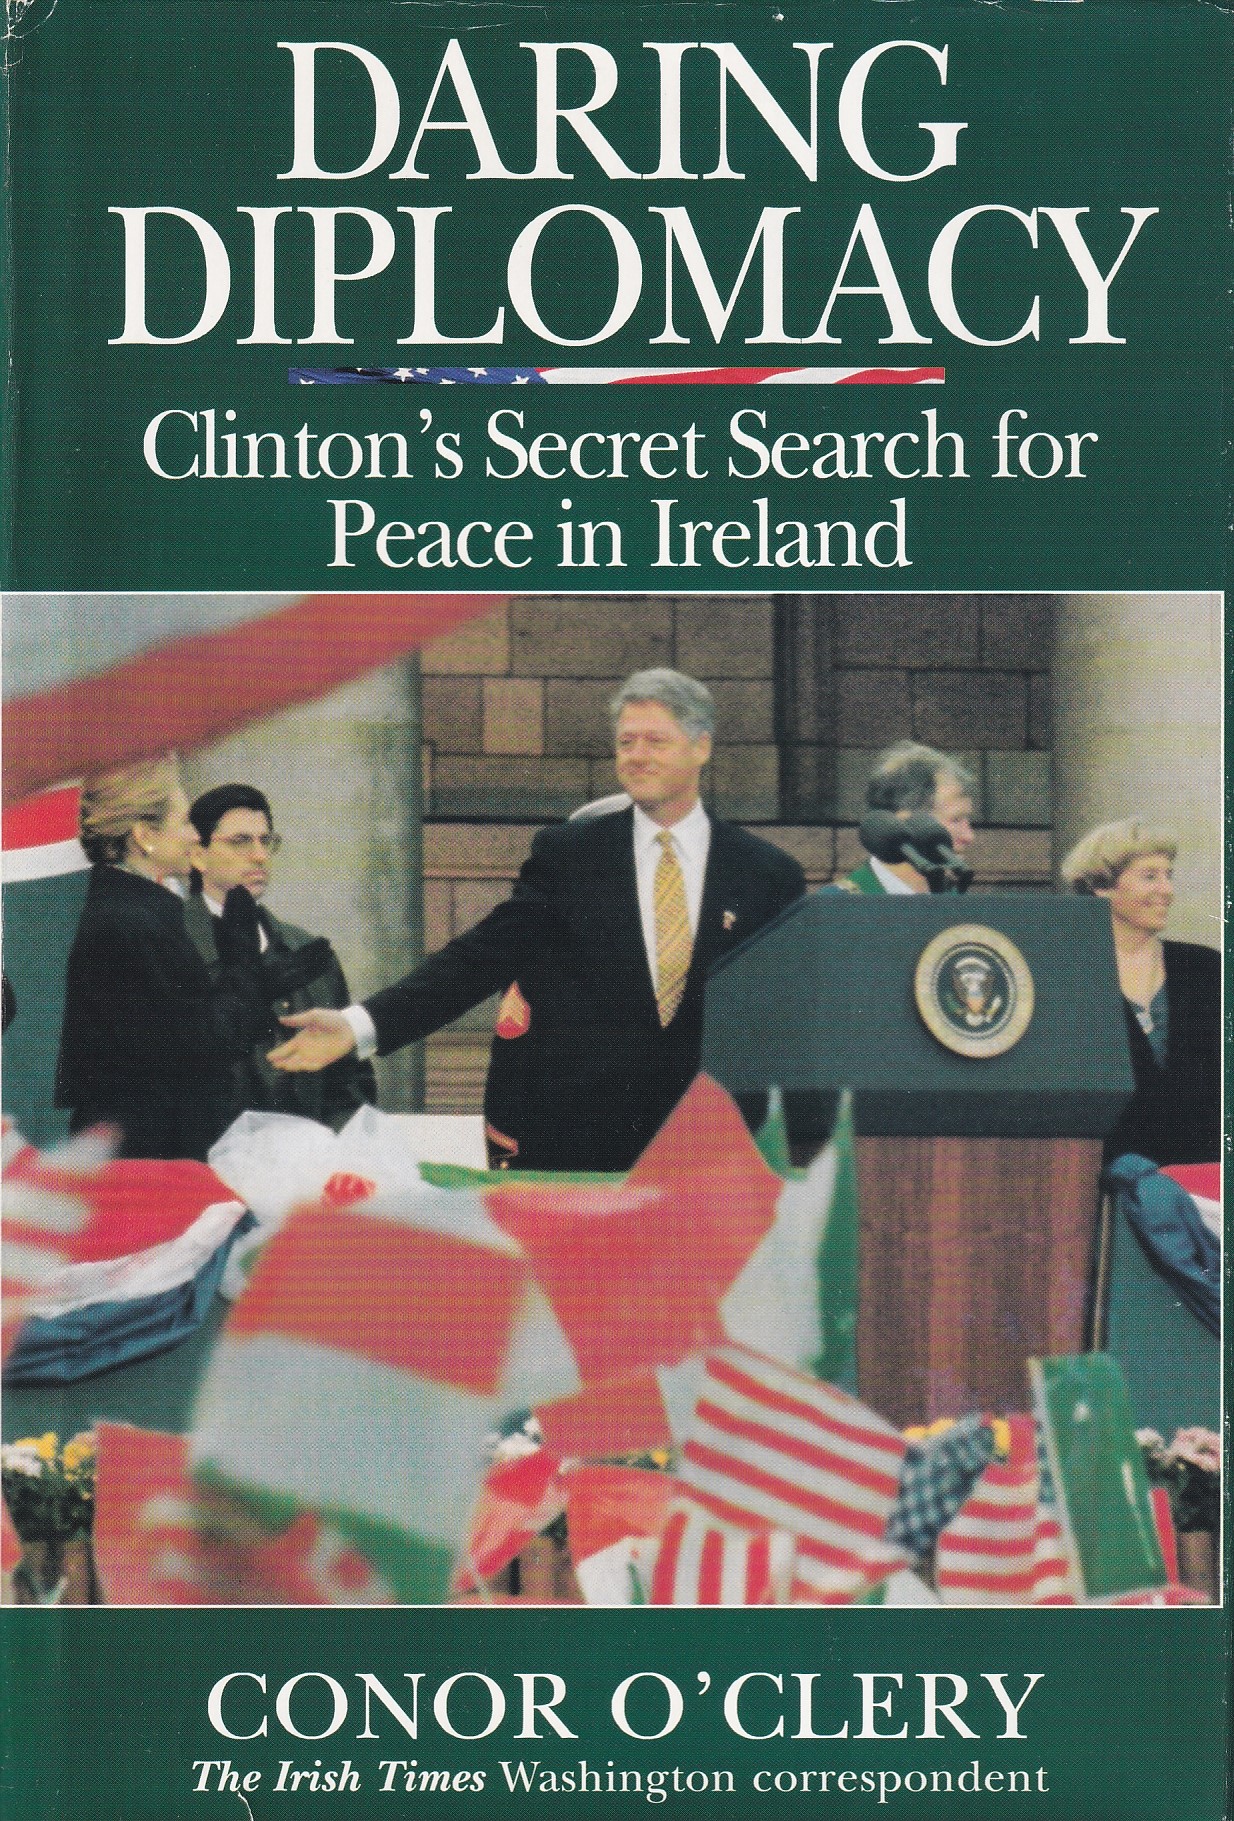 Daring Diplomacy: Clinton’s Secret Search for Peace in Ireland | Conor O'Clery | Charlie Byrne's